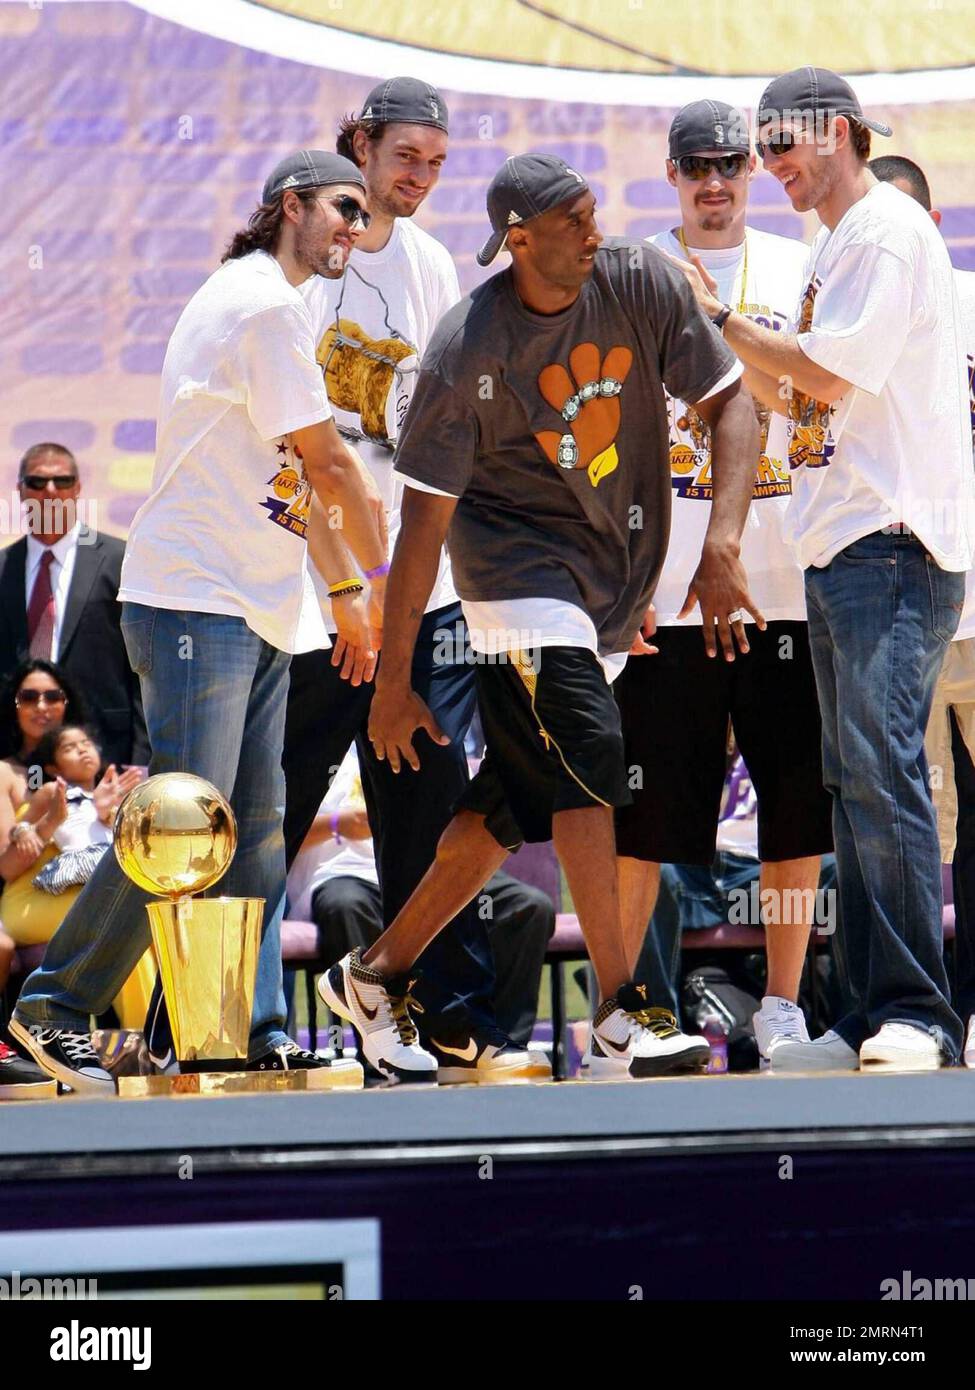 The Los Angeles Lakers celebrate their NBA Championship with a parade across downtown Los Angeles and ending at the Los Angeles Memorial Coliseum in front of 95,000 fans. Los Angeles, CA. 06/17/2009. Stock Photo